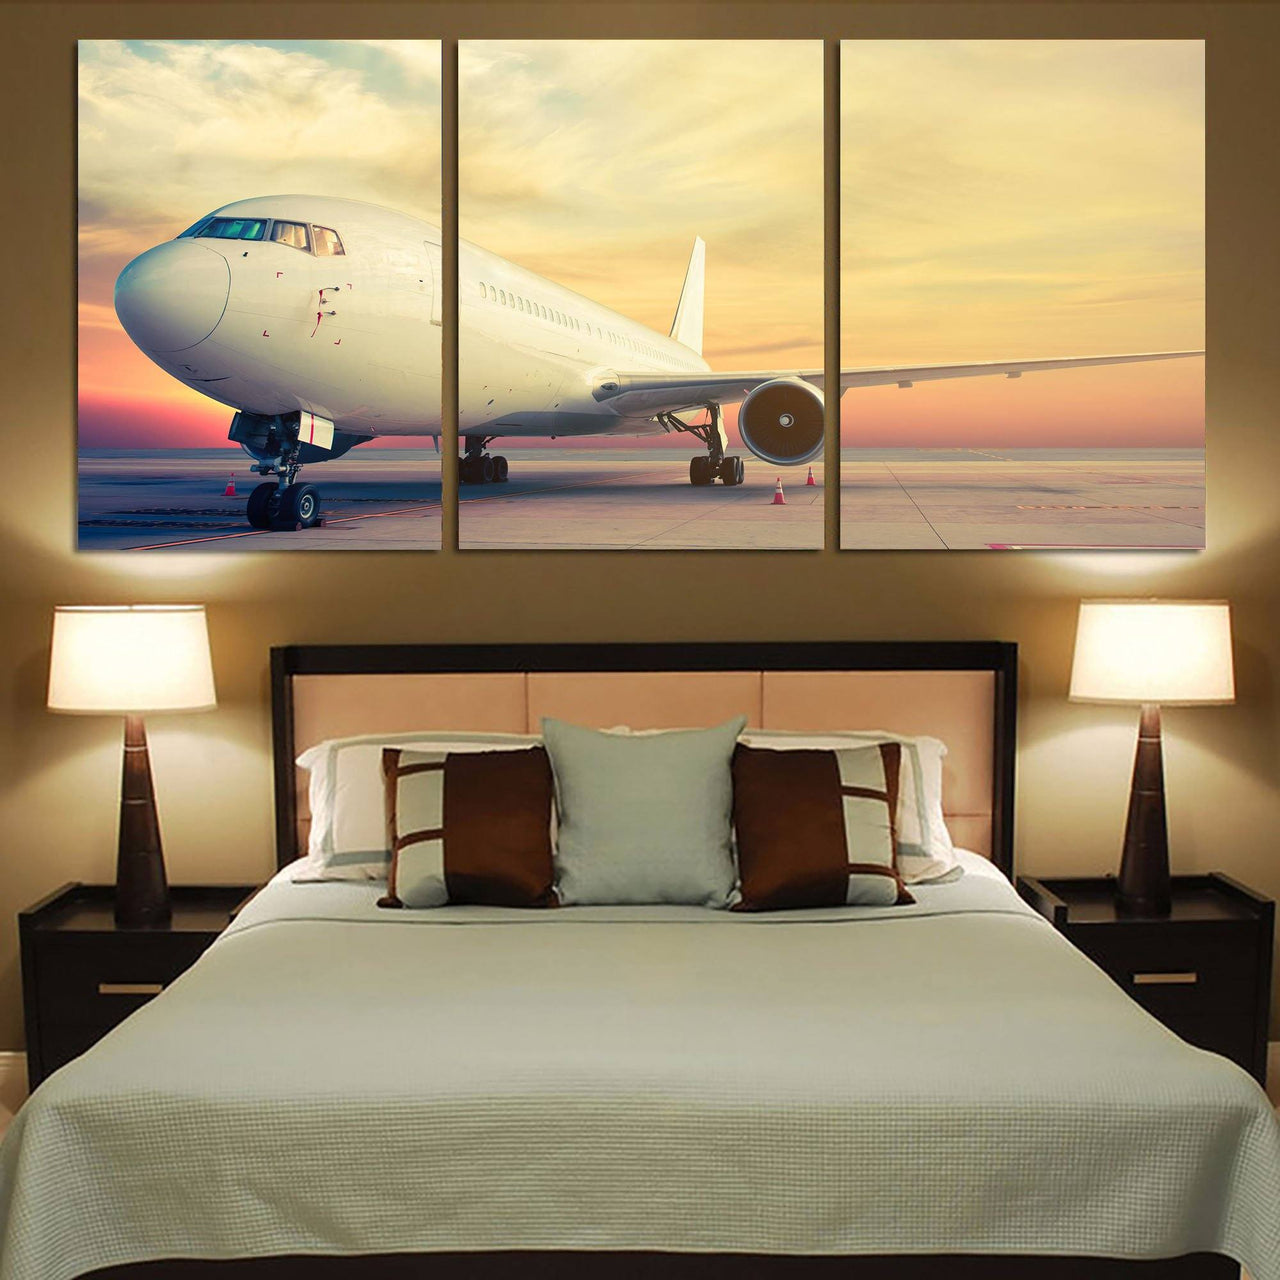 Parked Aircraft During Sunset Printed Canvas Posters (3 Pieces) Aviation Shop 